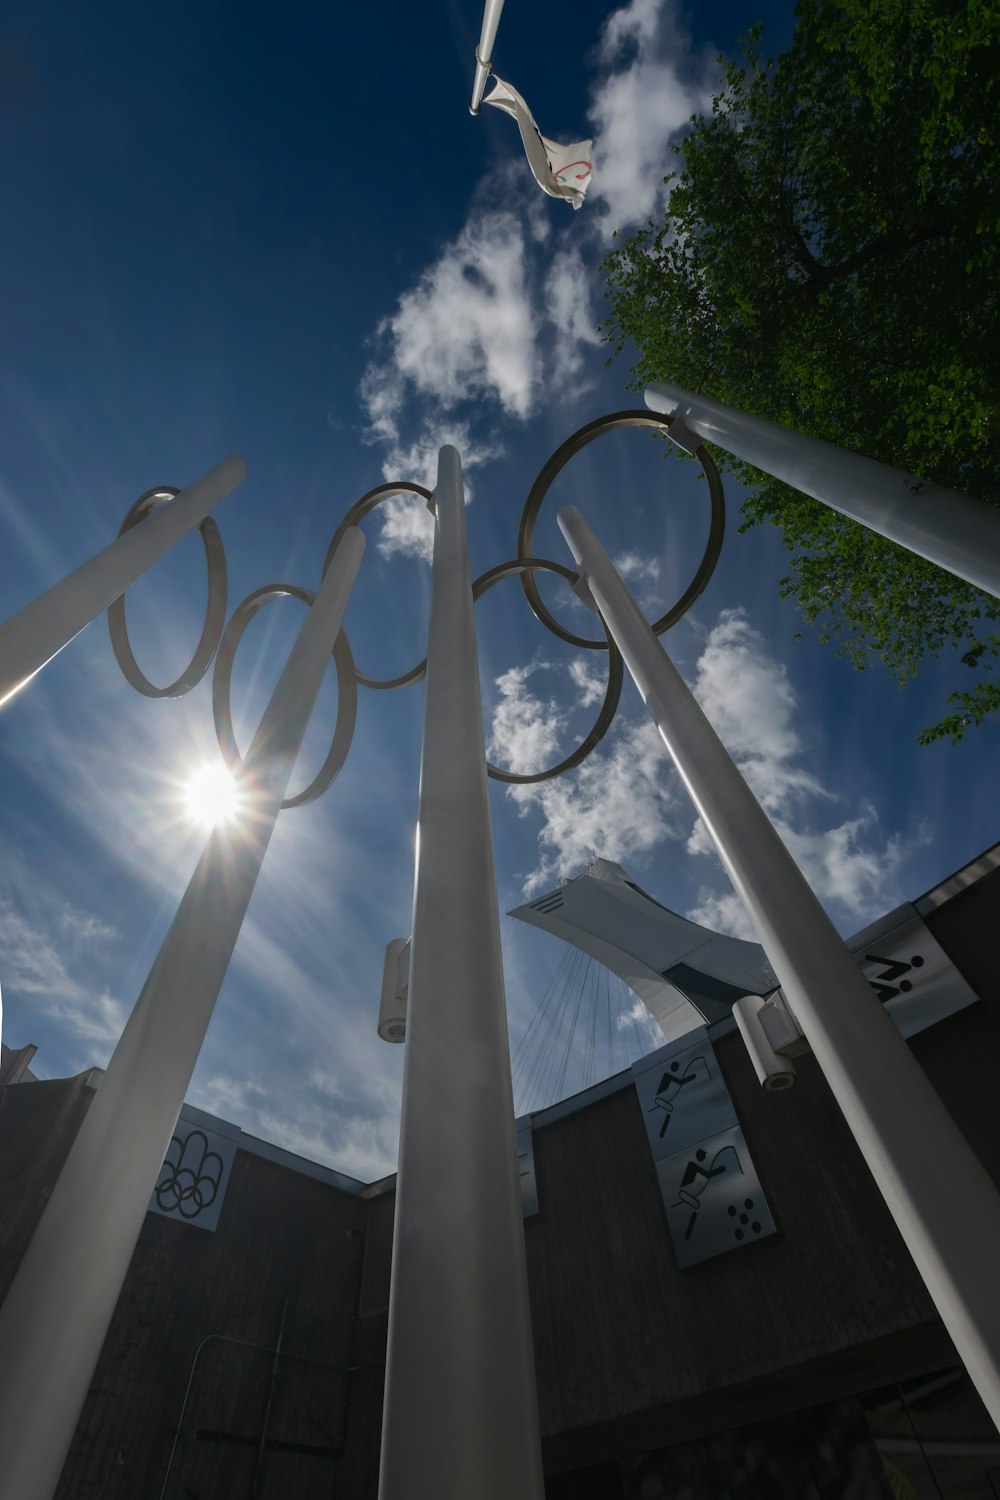 the olympic rings are in front of a building